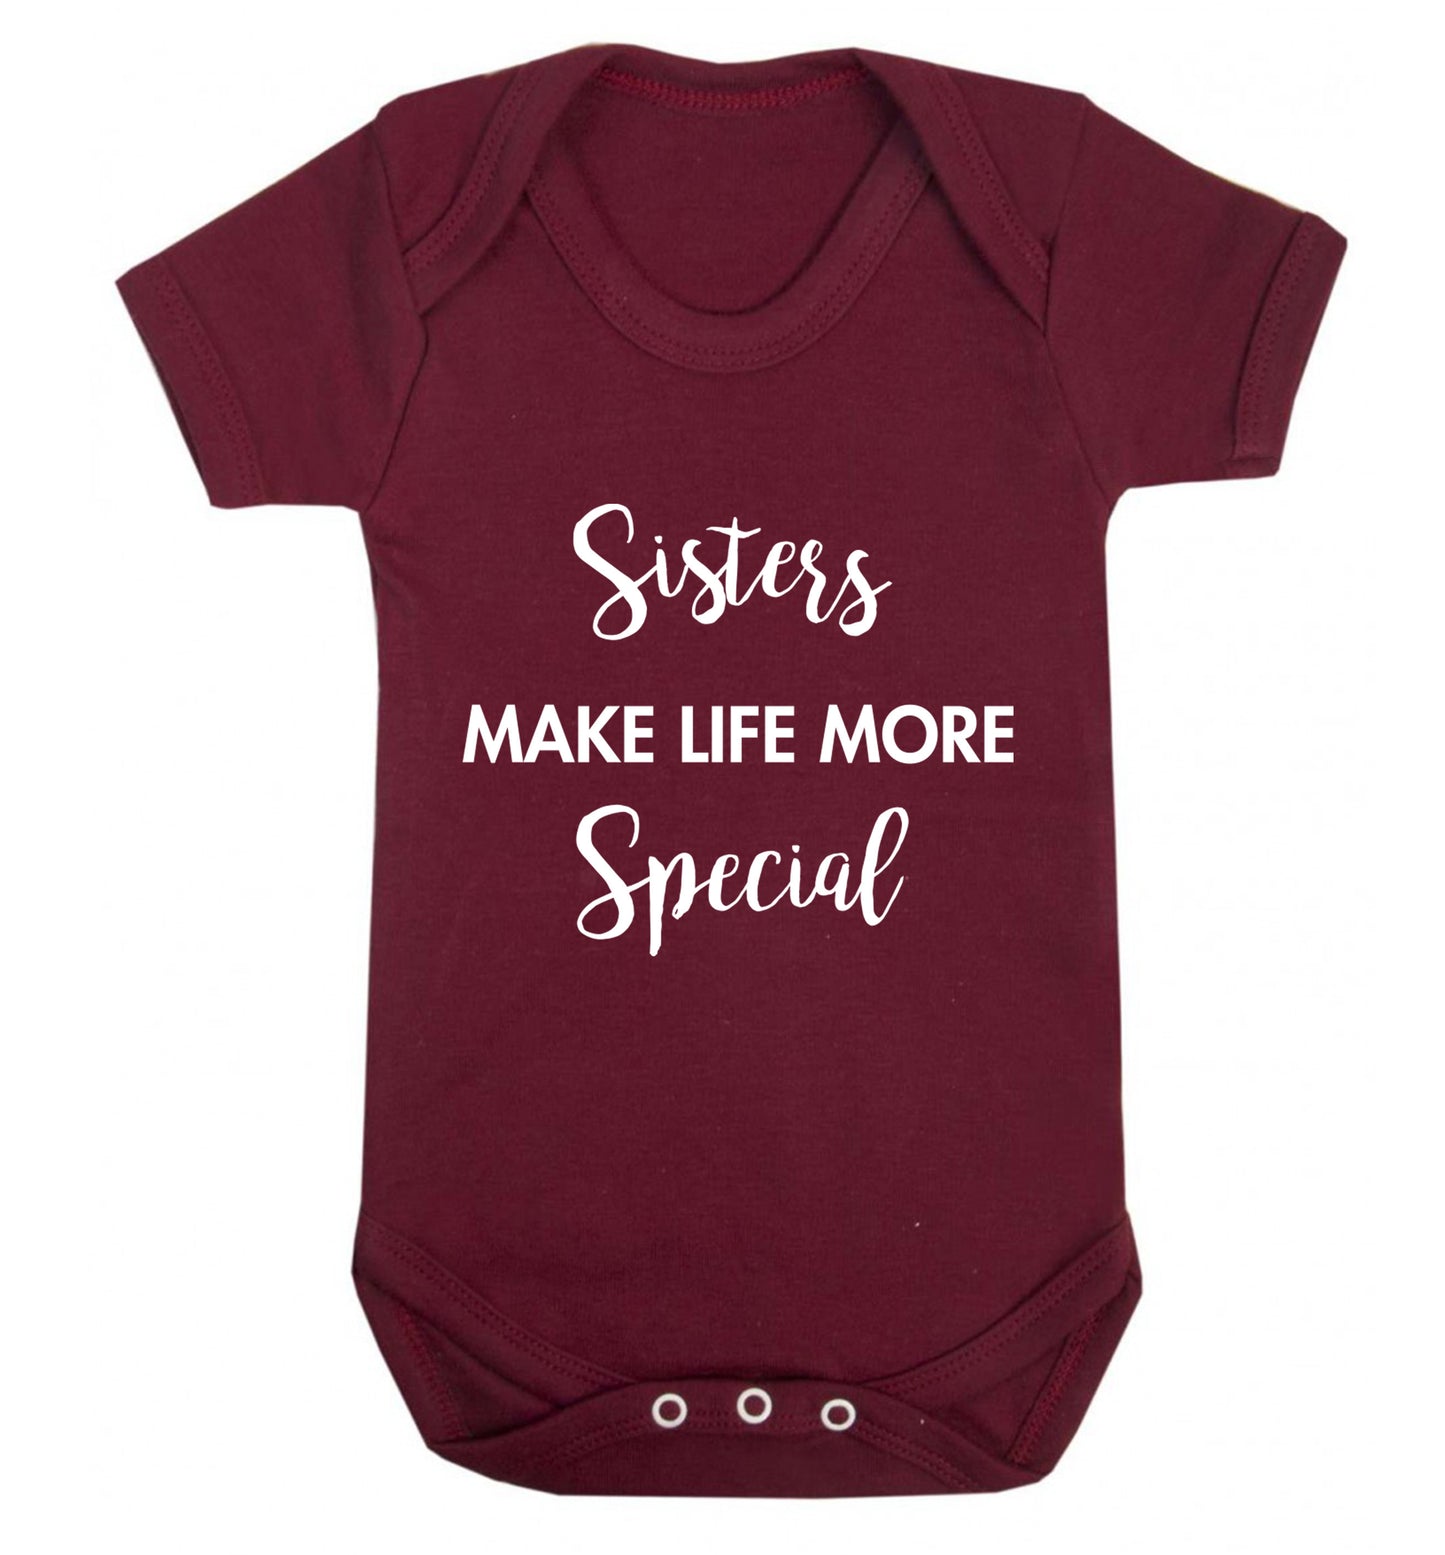 Sisters make life more special Baby Vest maroon 18-24 months